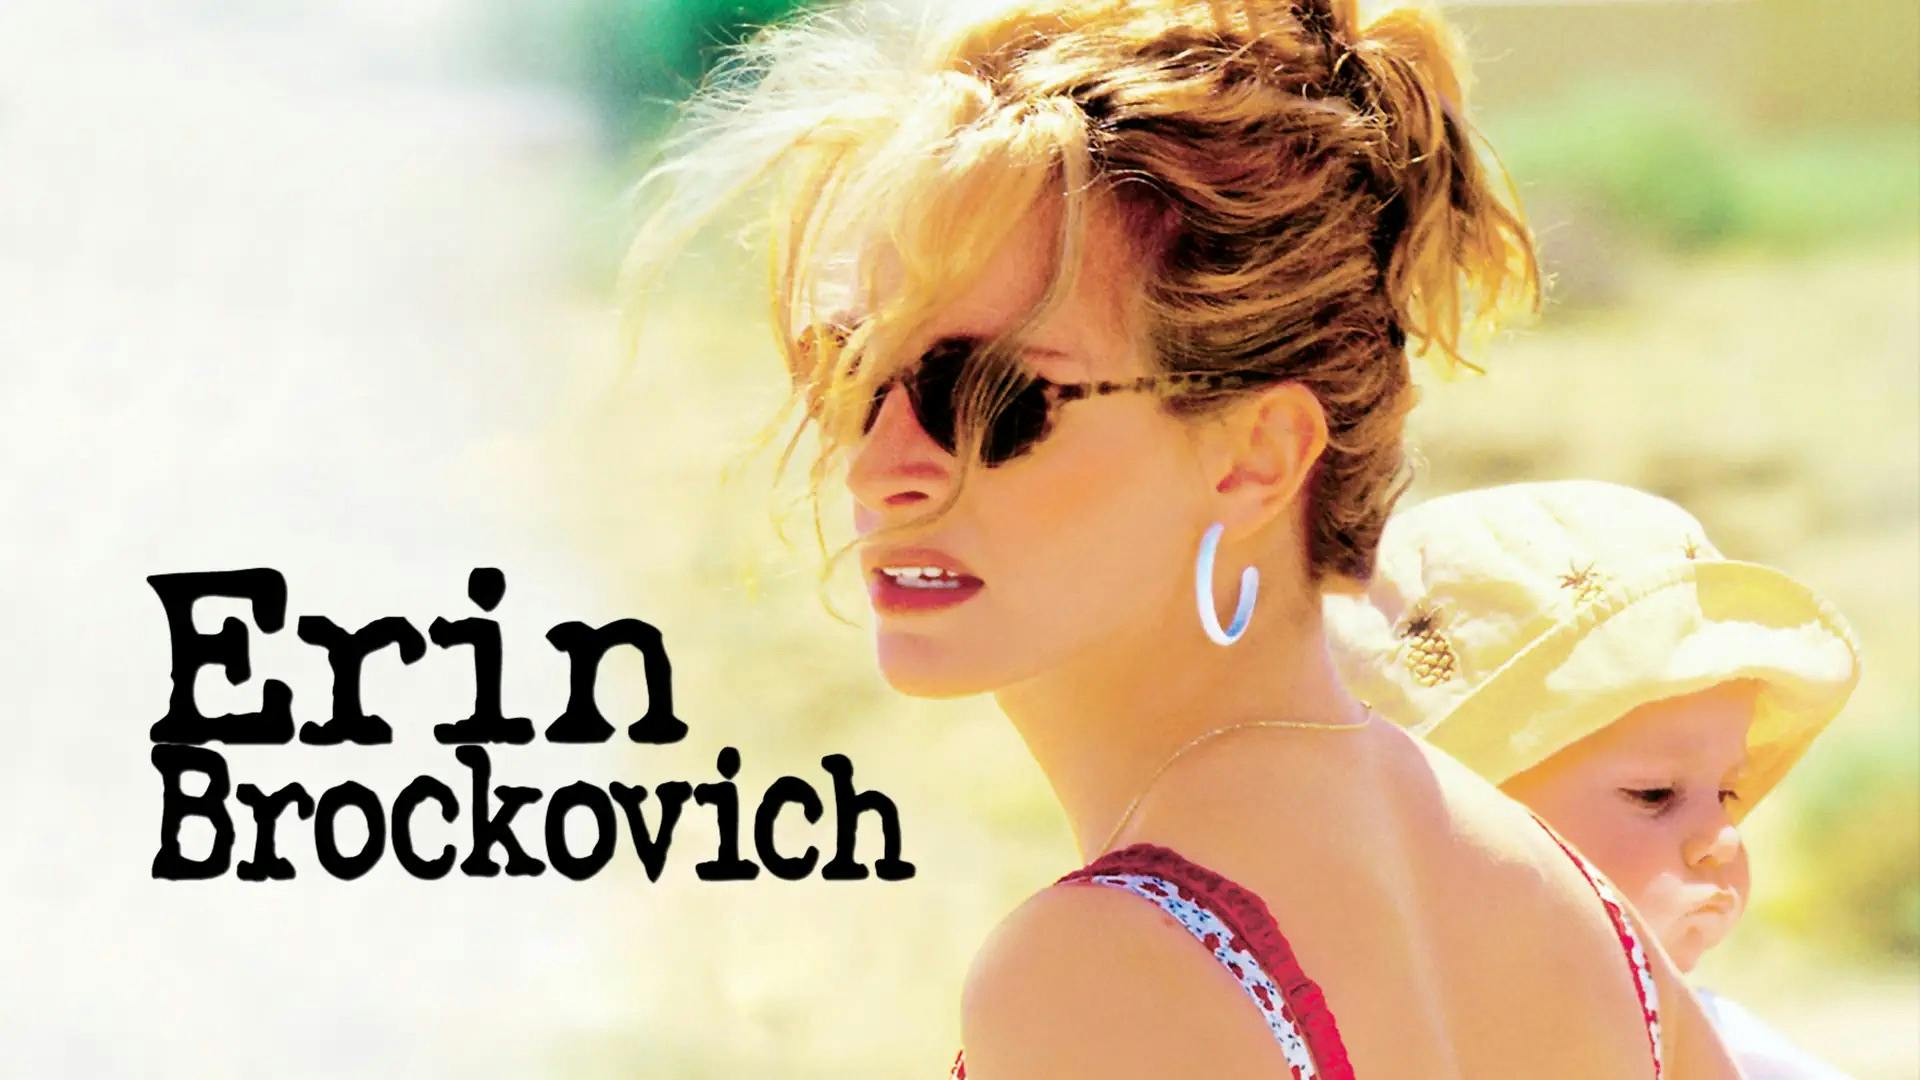 The thumbnail cover for the movie Erin Brockovich